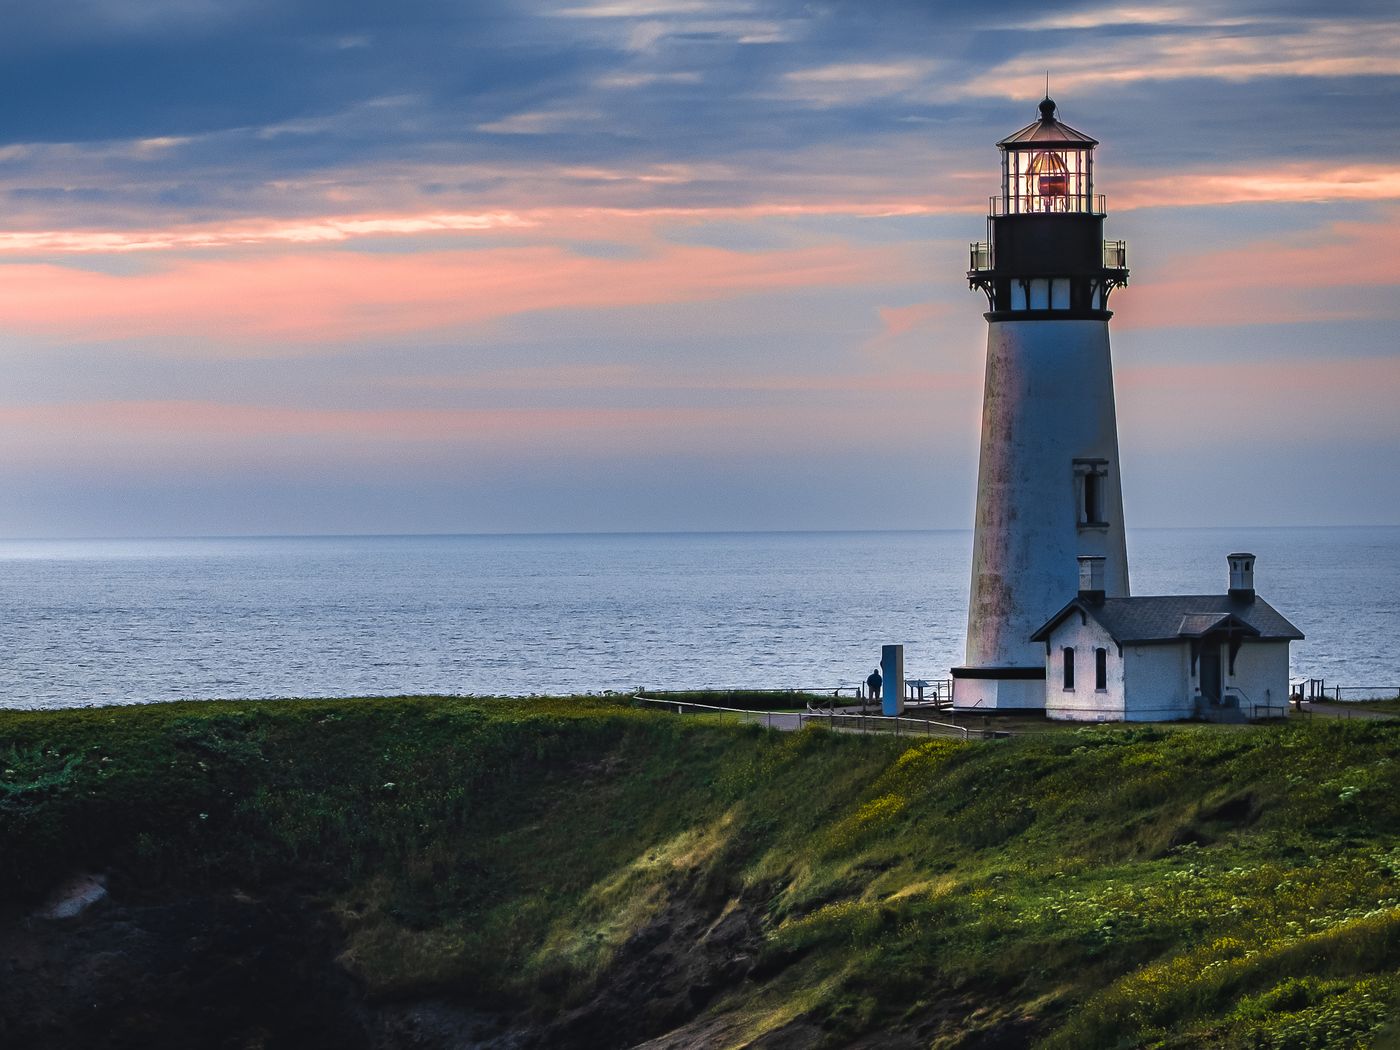 OPENER - Built in 1872, the Yaquina Head Lighthouse sits atop a narrow point of land that extends almost a mile into the Pacific Ocean.